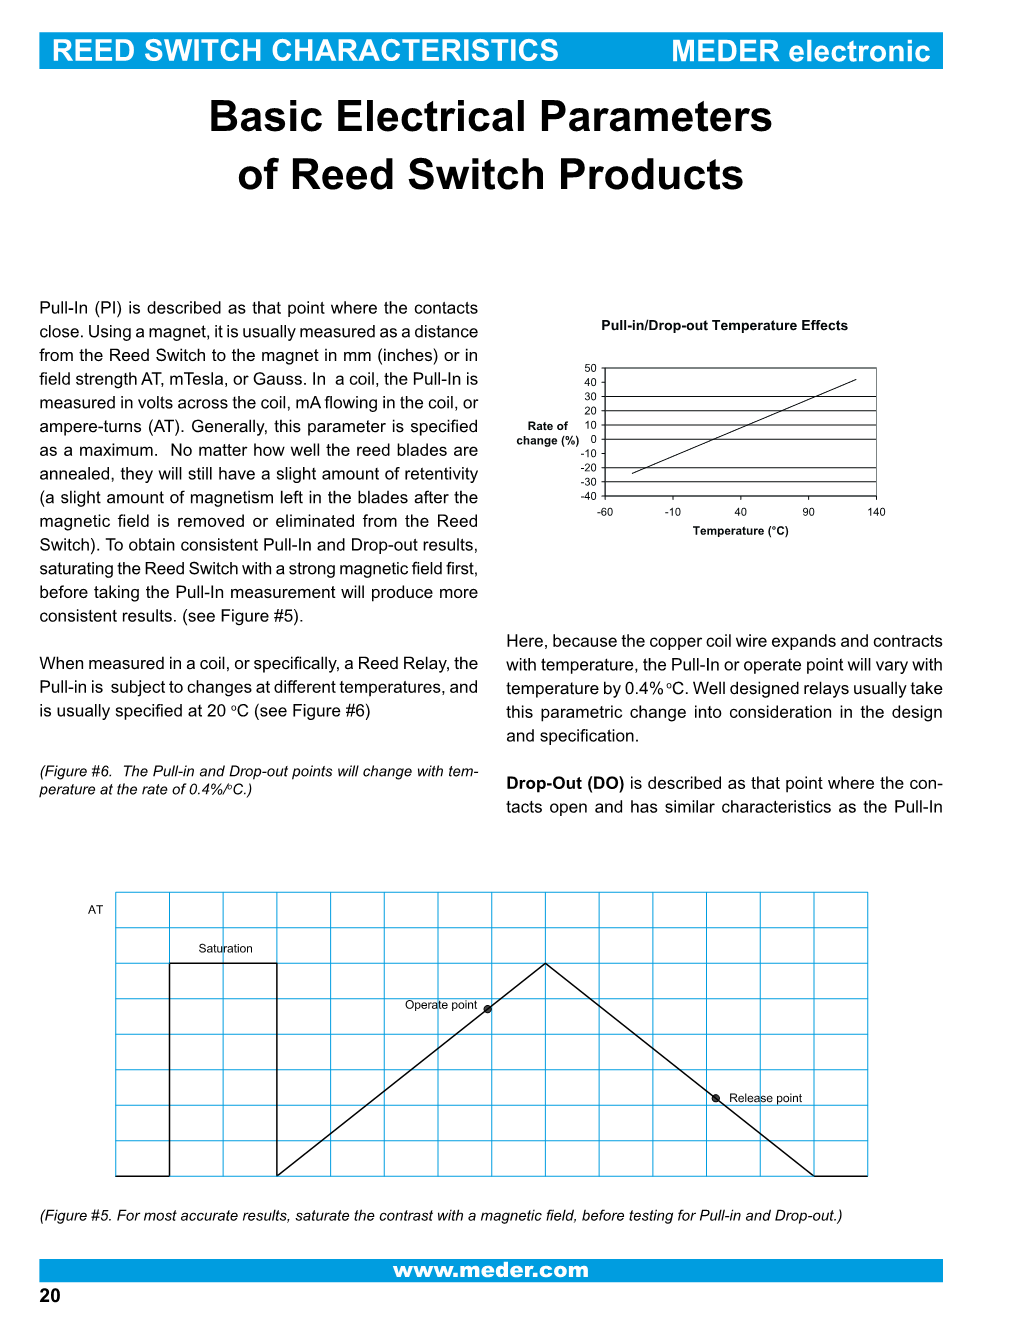 Basic Electrical Parameters of Reed Switch Products